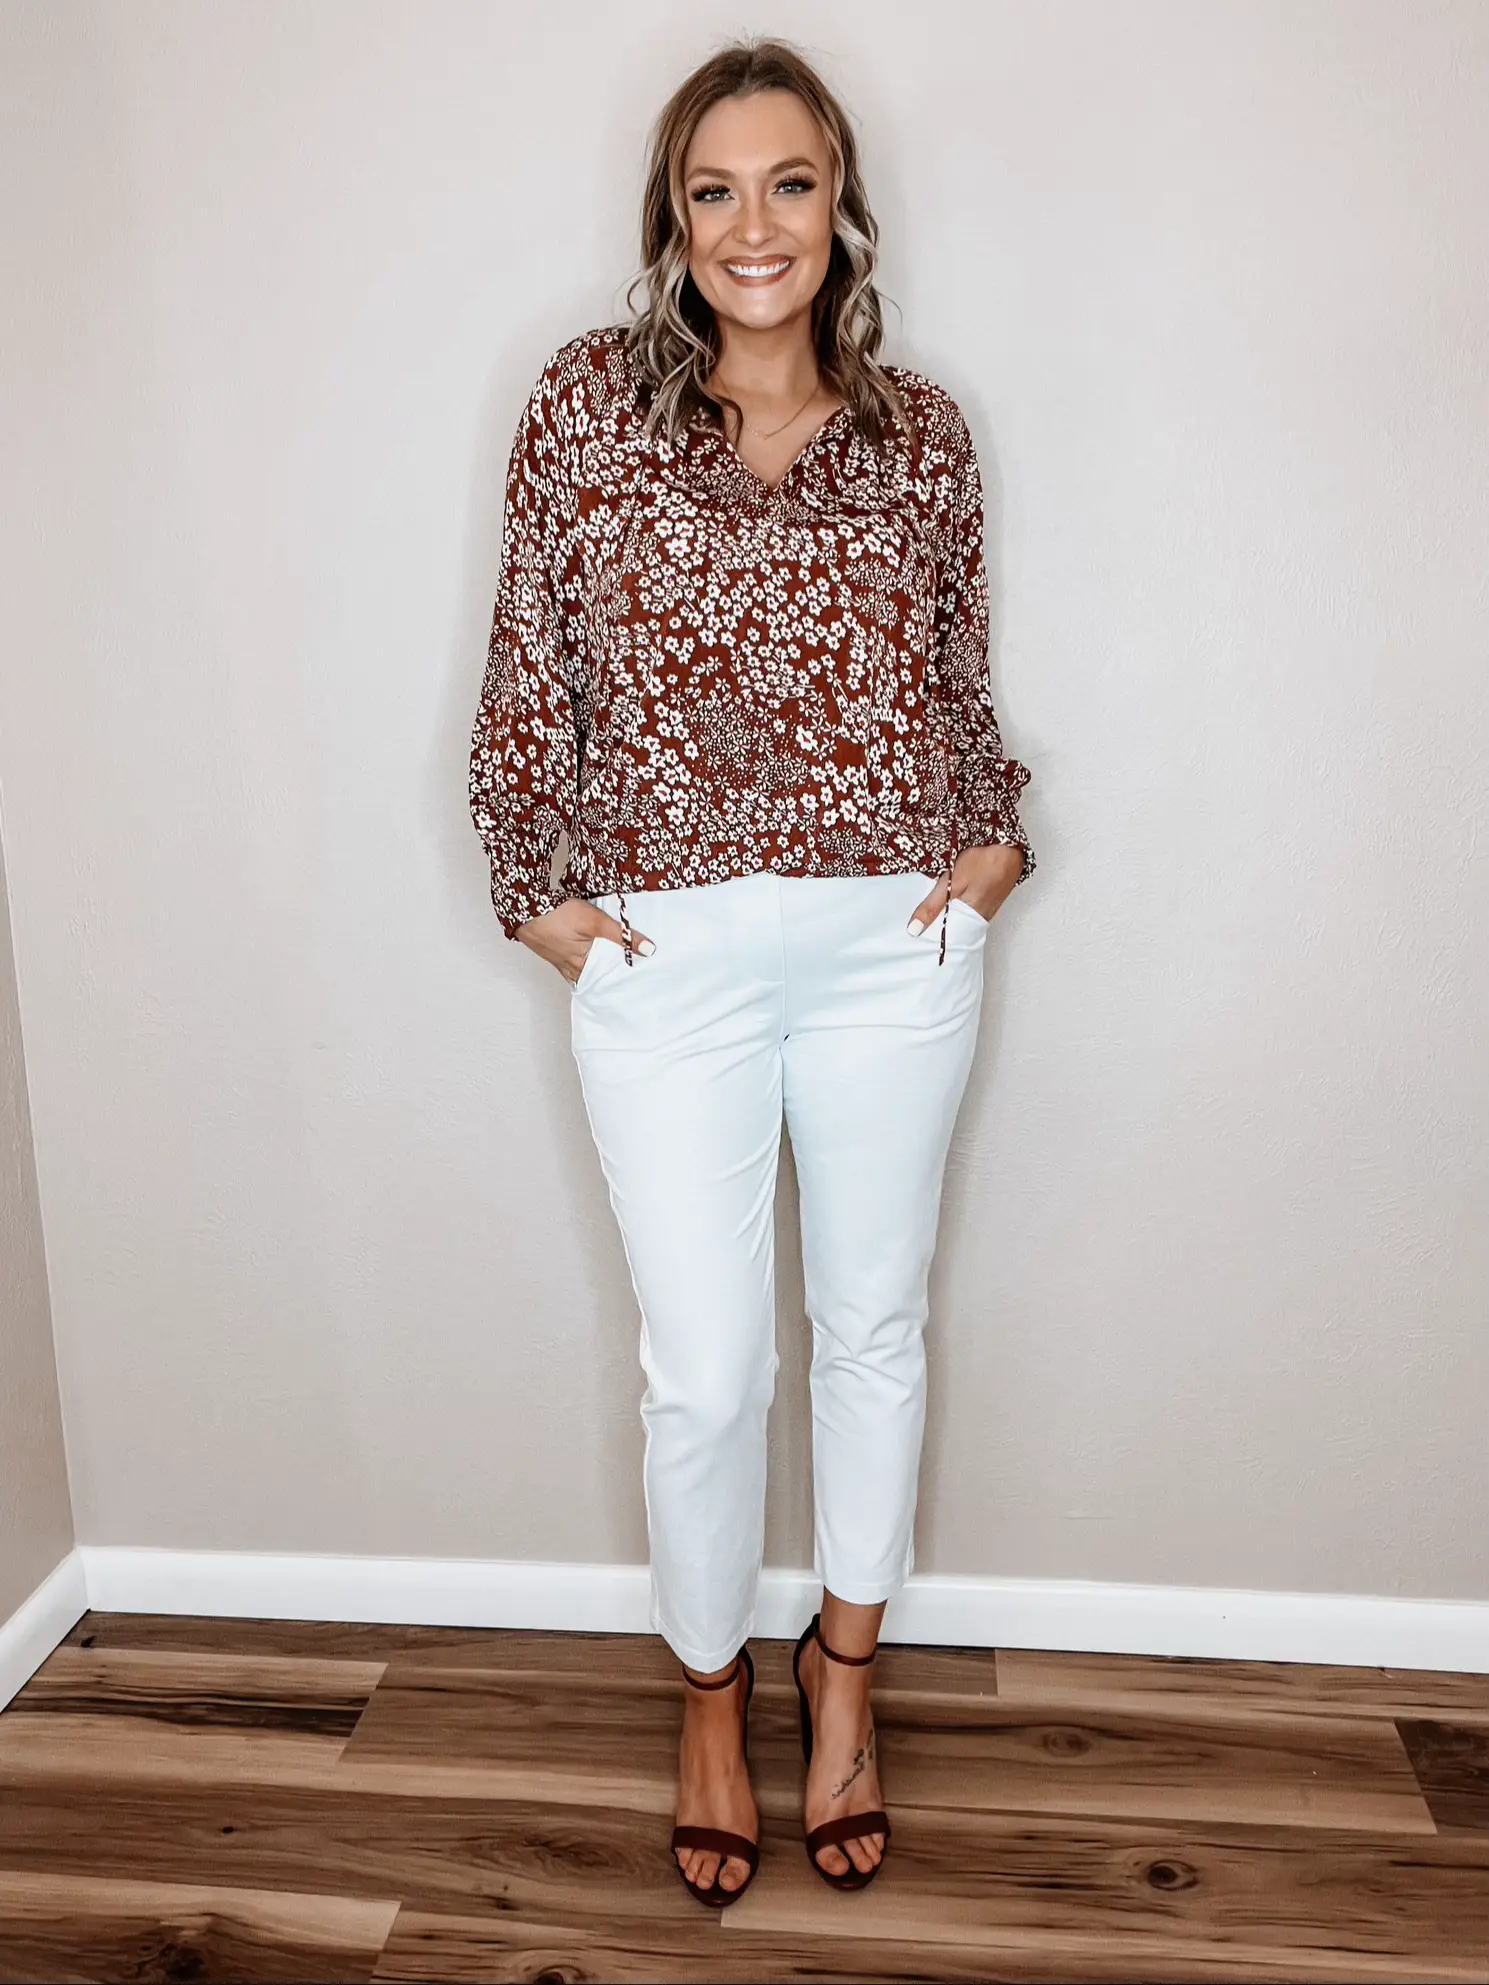 MIDSIZE  OFFICE OUTFIT, Midsize Affordable  Office Outfit  Idea! to shop, comment LINK & I'll send you a link with the details!  #midsize #midsizegals #fashion